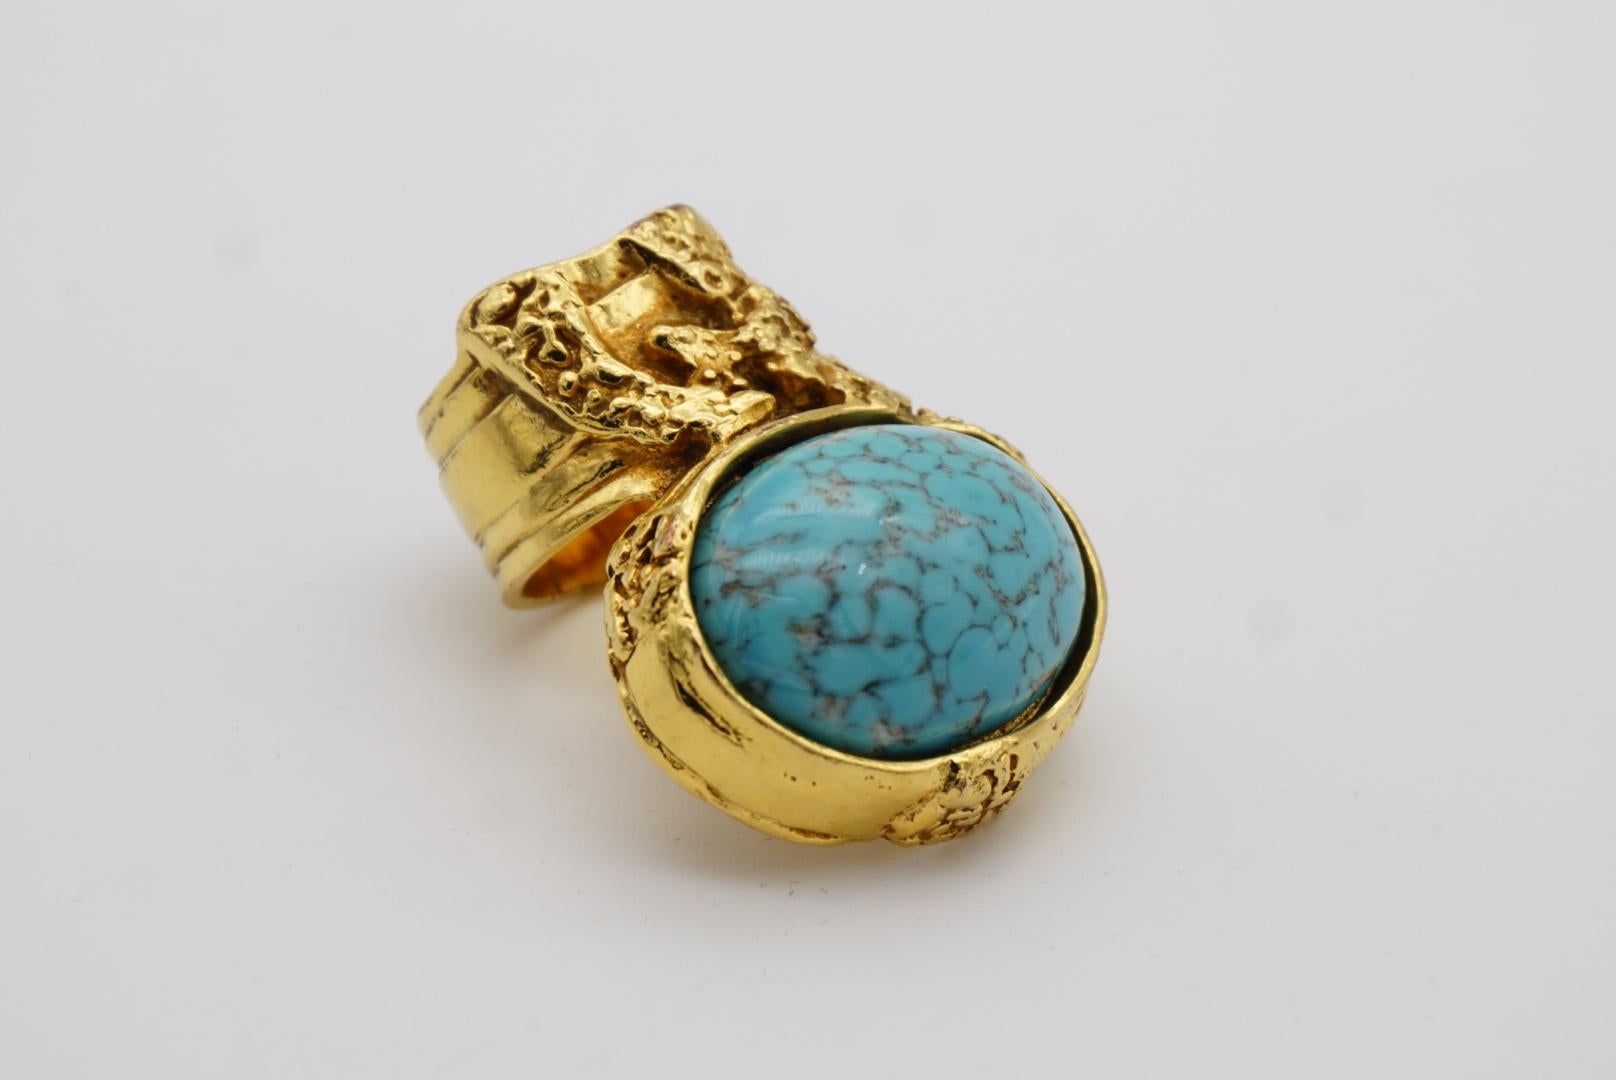 Yves Saint Laurent YSL Arty Turquoise Statement Enamel Chunky Gold Ring, Size 6 In Excellent Condition For Sale In Wokingham, England